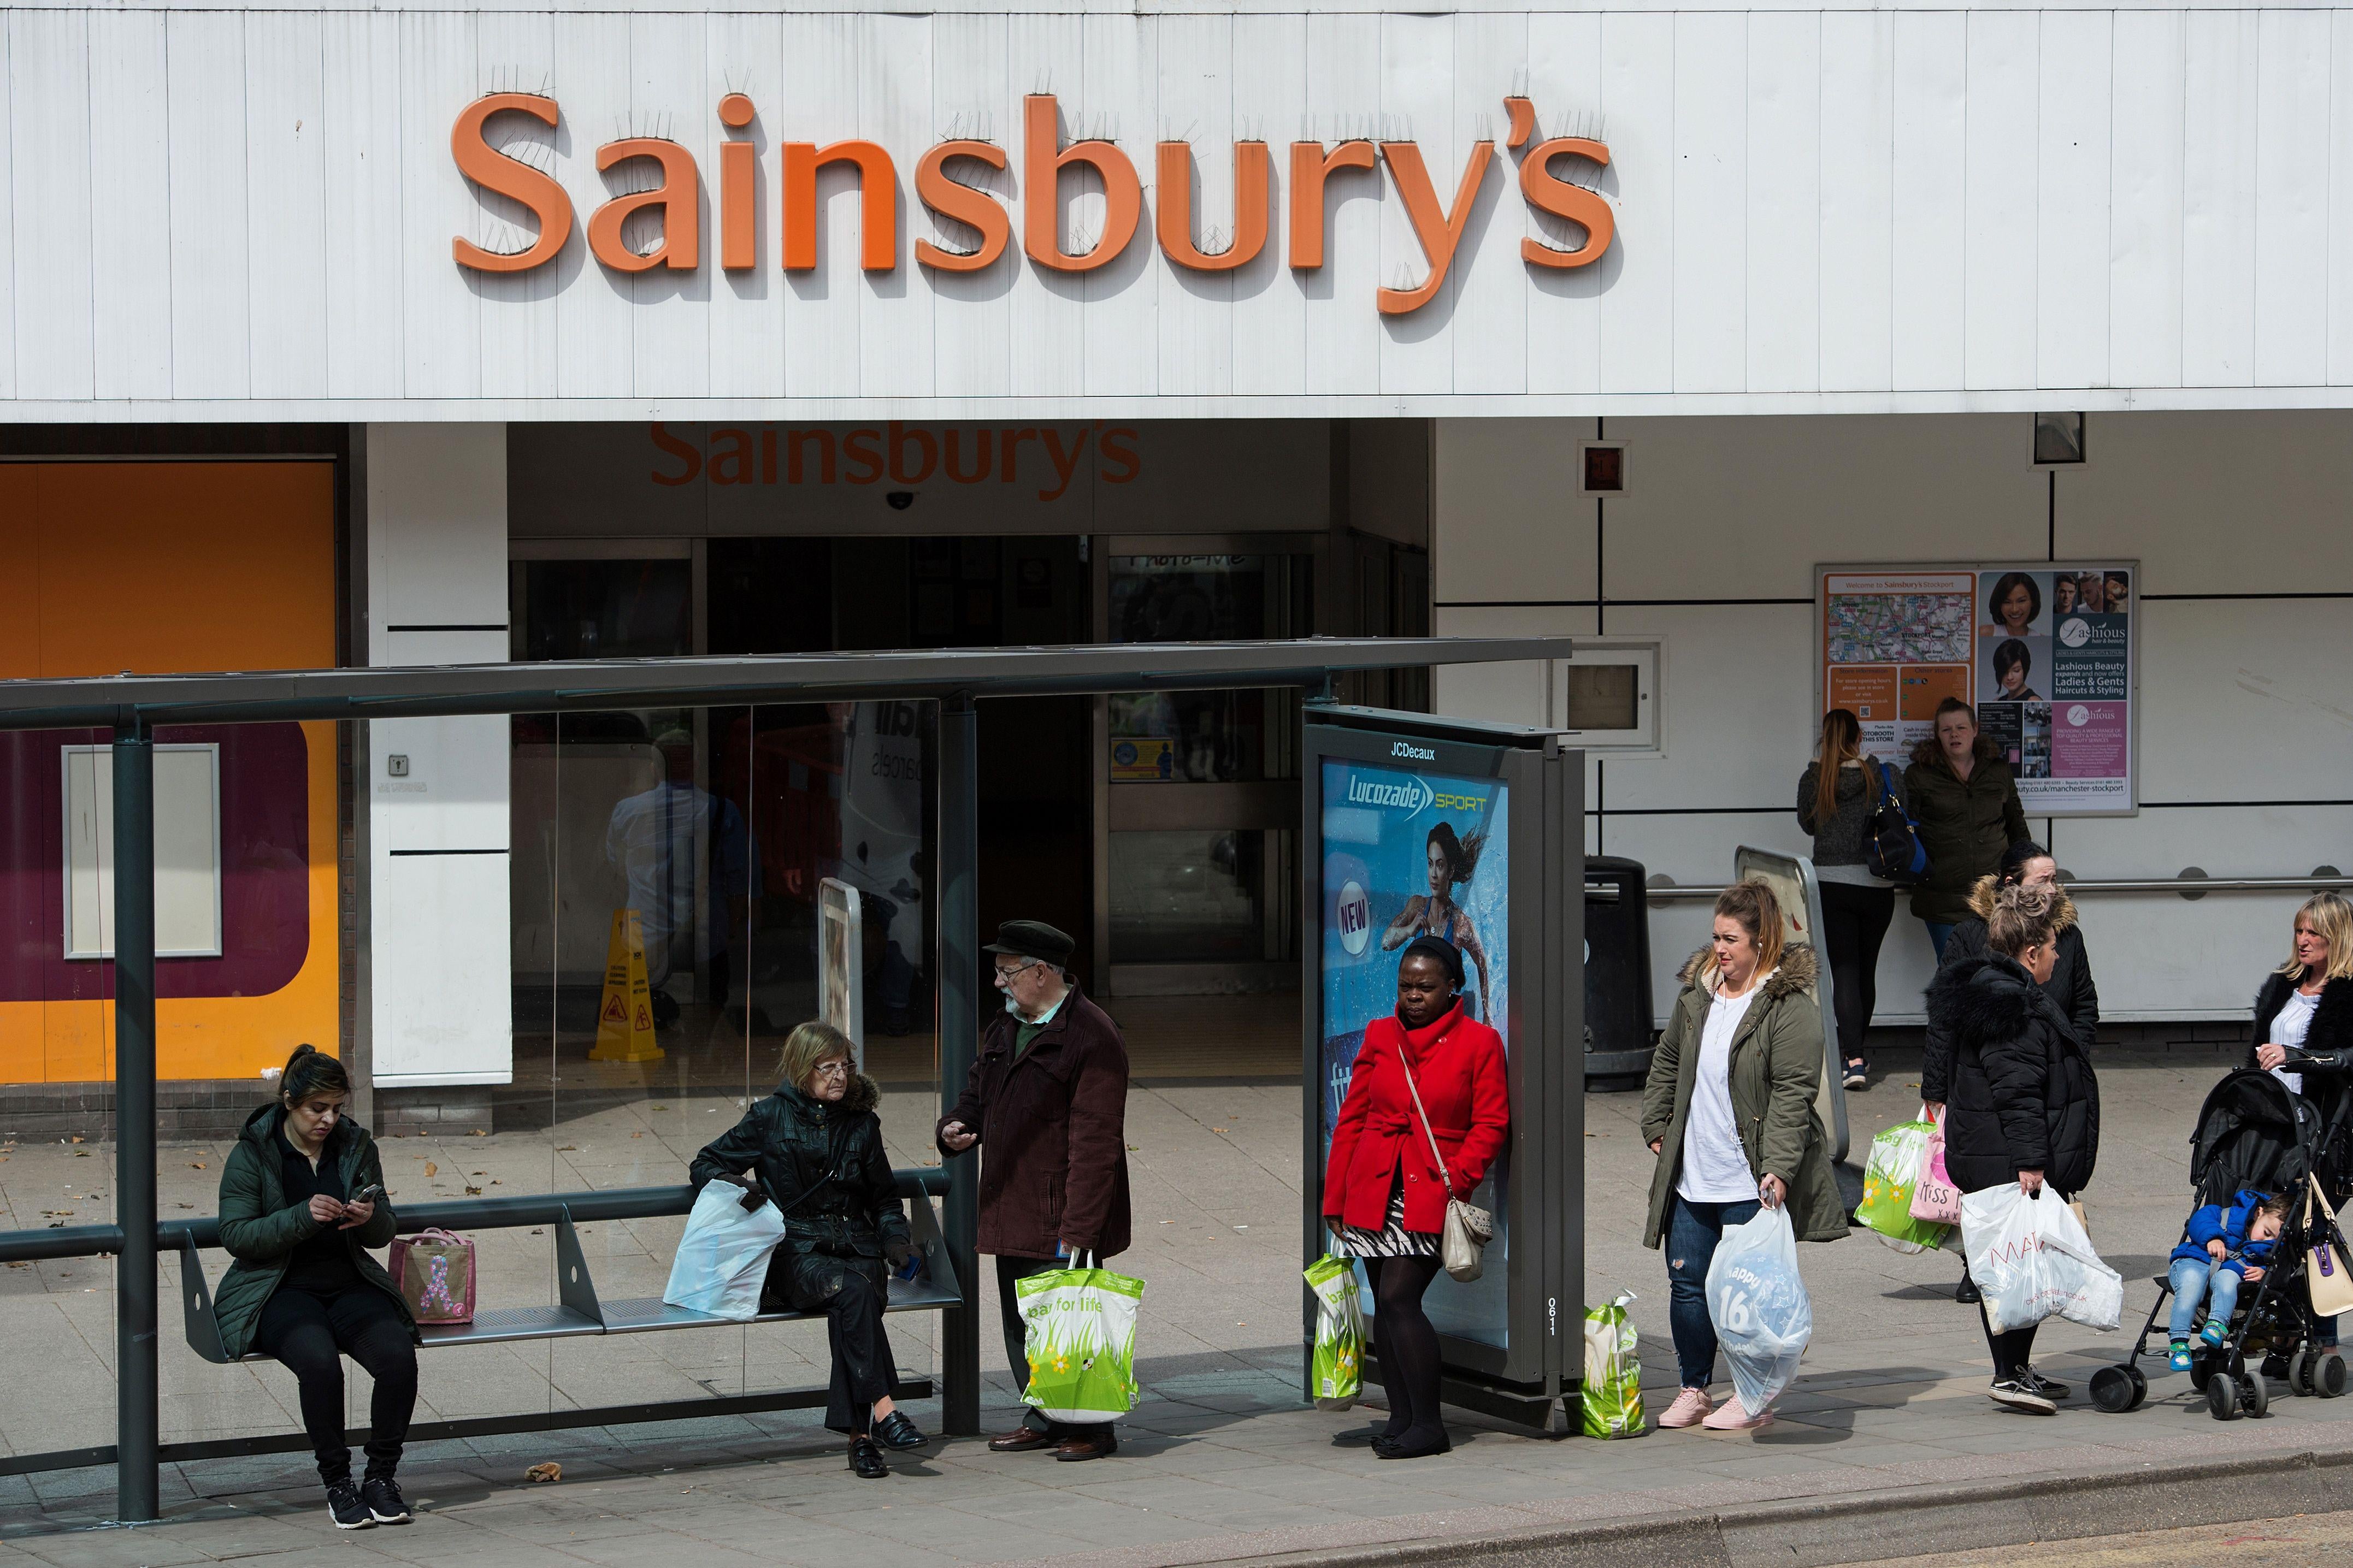 The exterior of a Sainsbury’s grocery